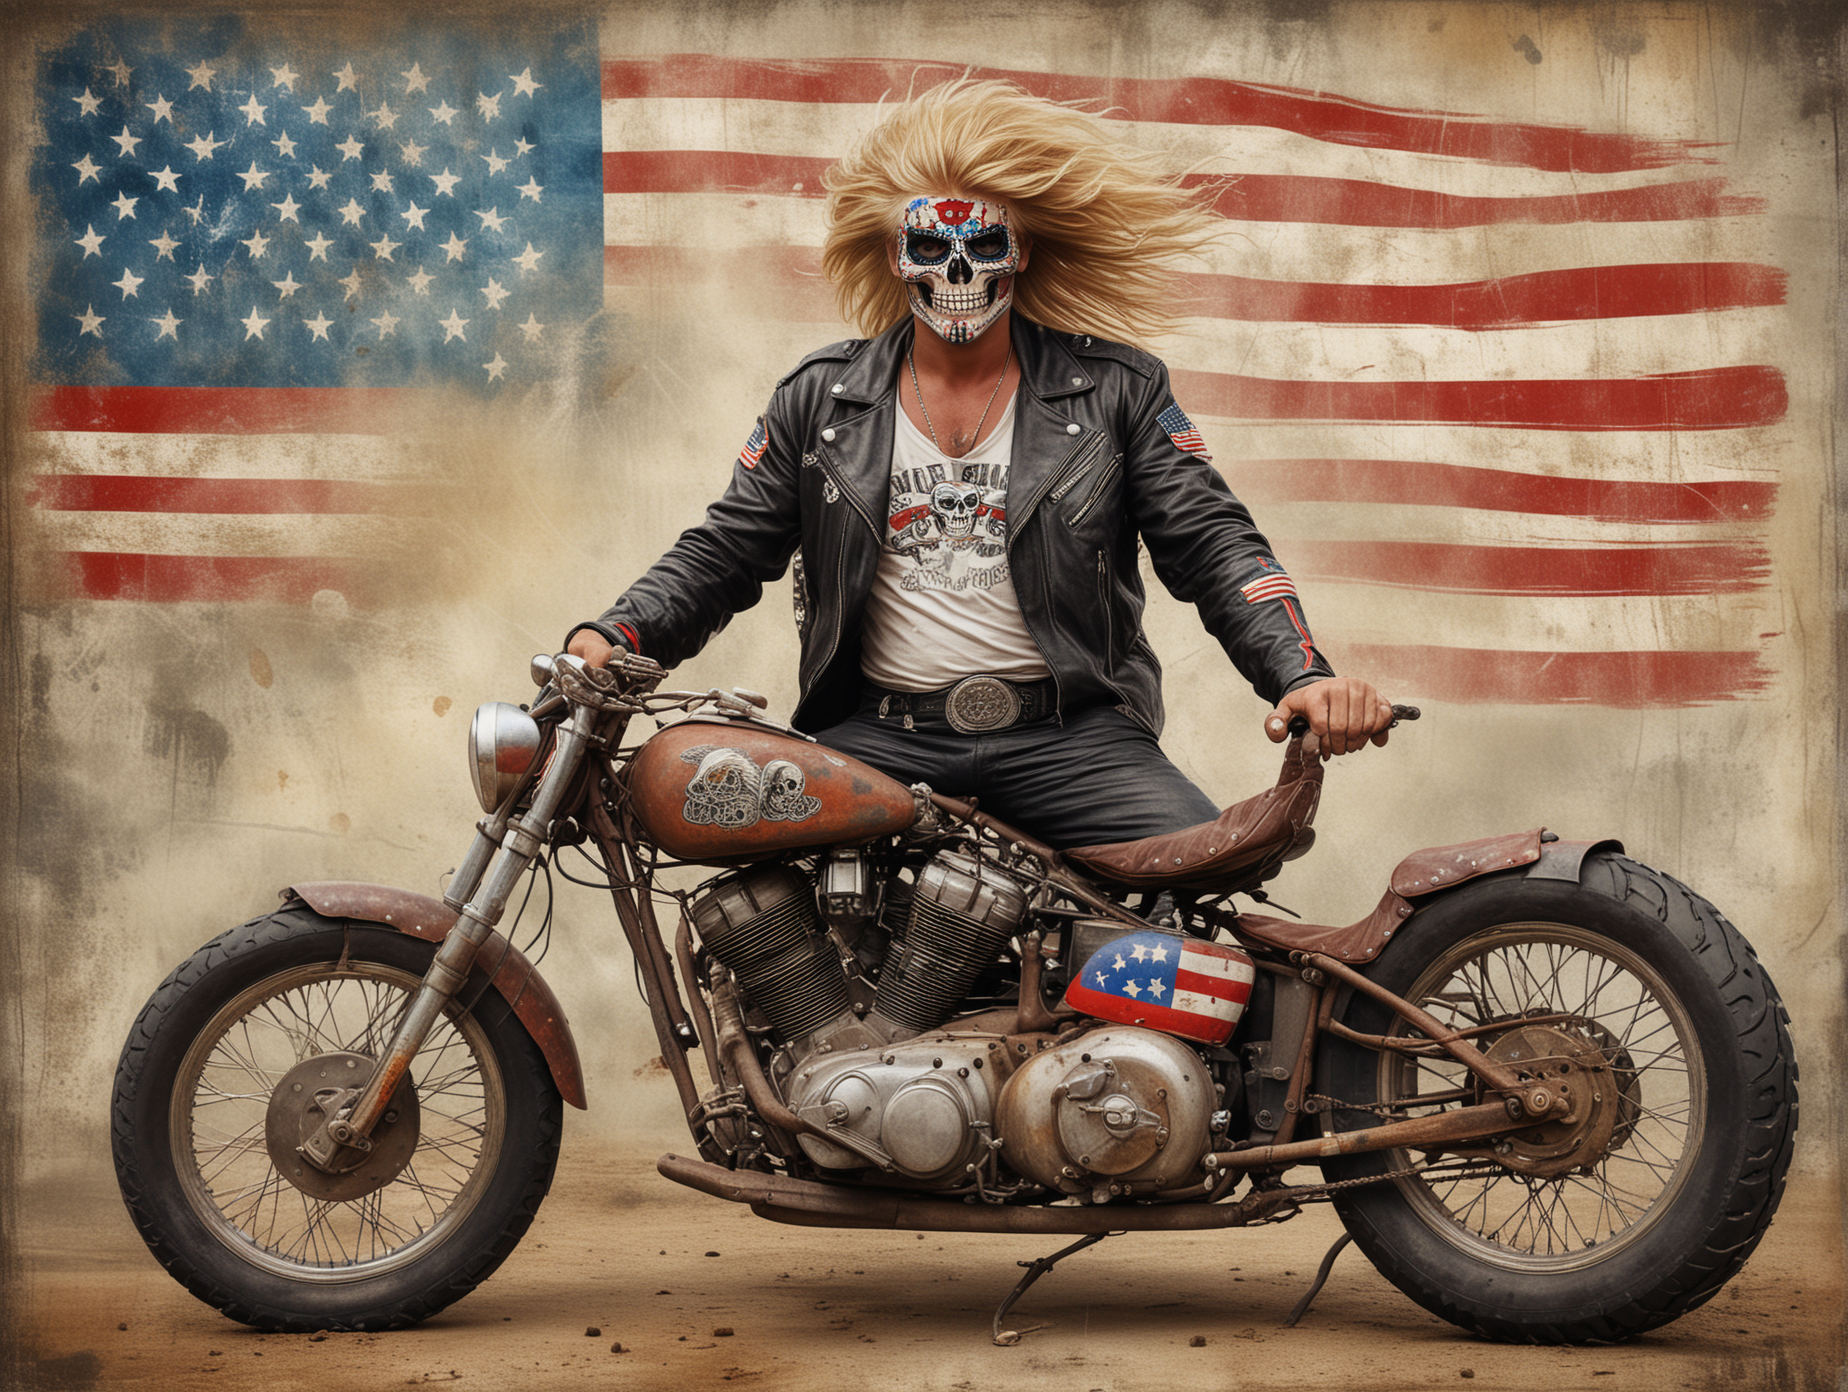 Donald Trump Riding Vintage Motorcycle Surrounded by Mexican Skull Art